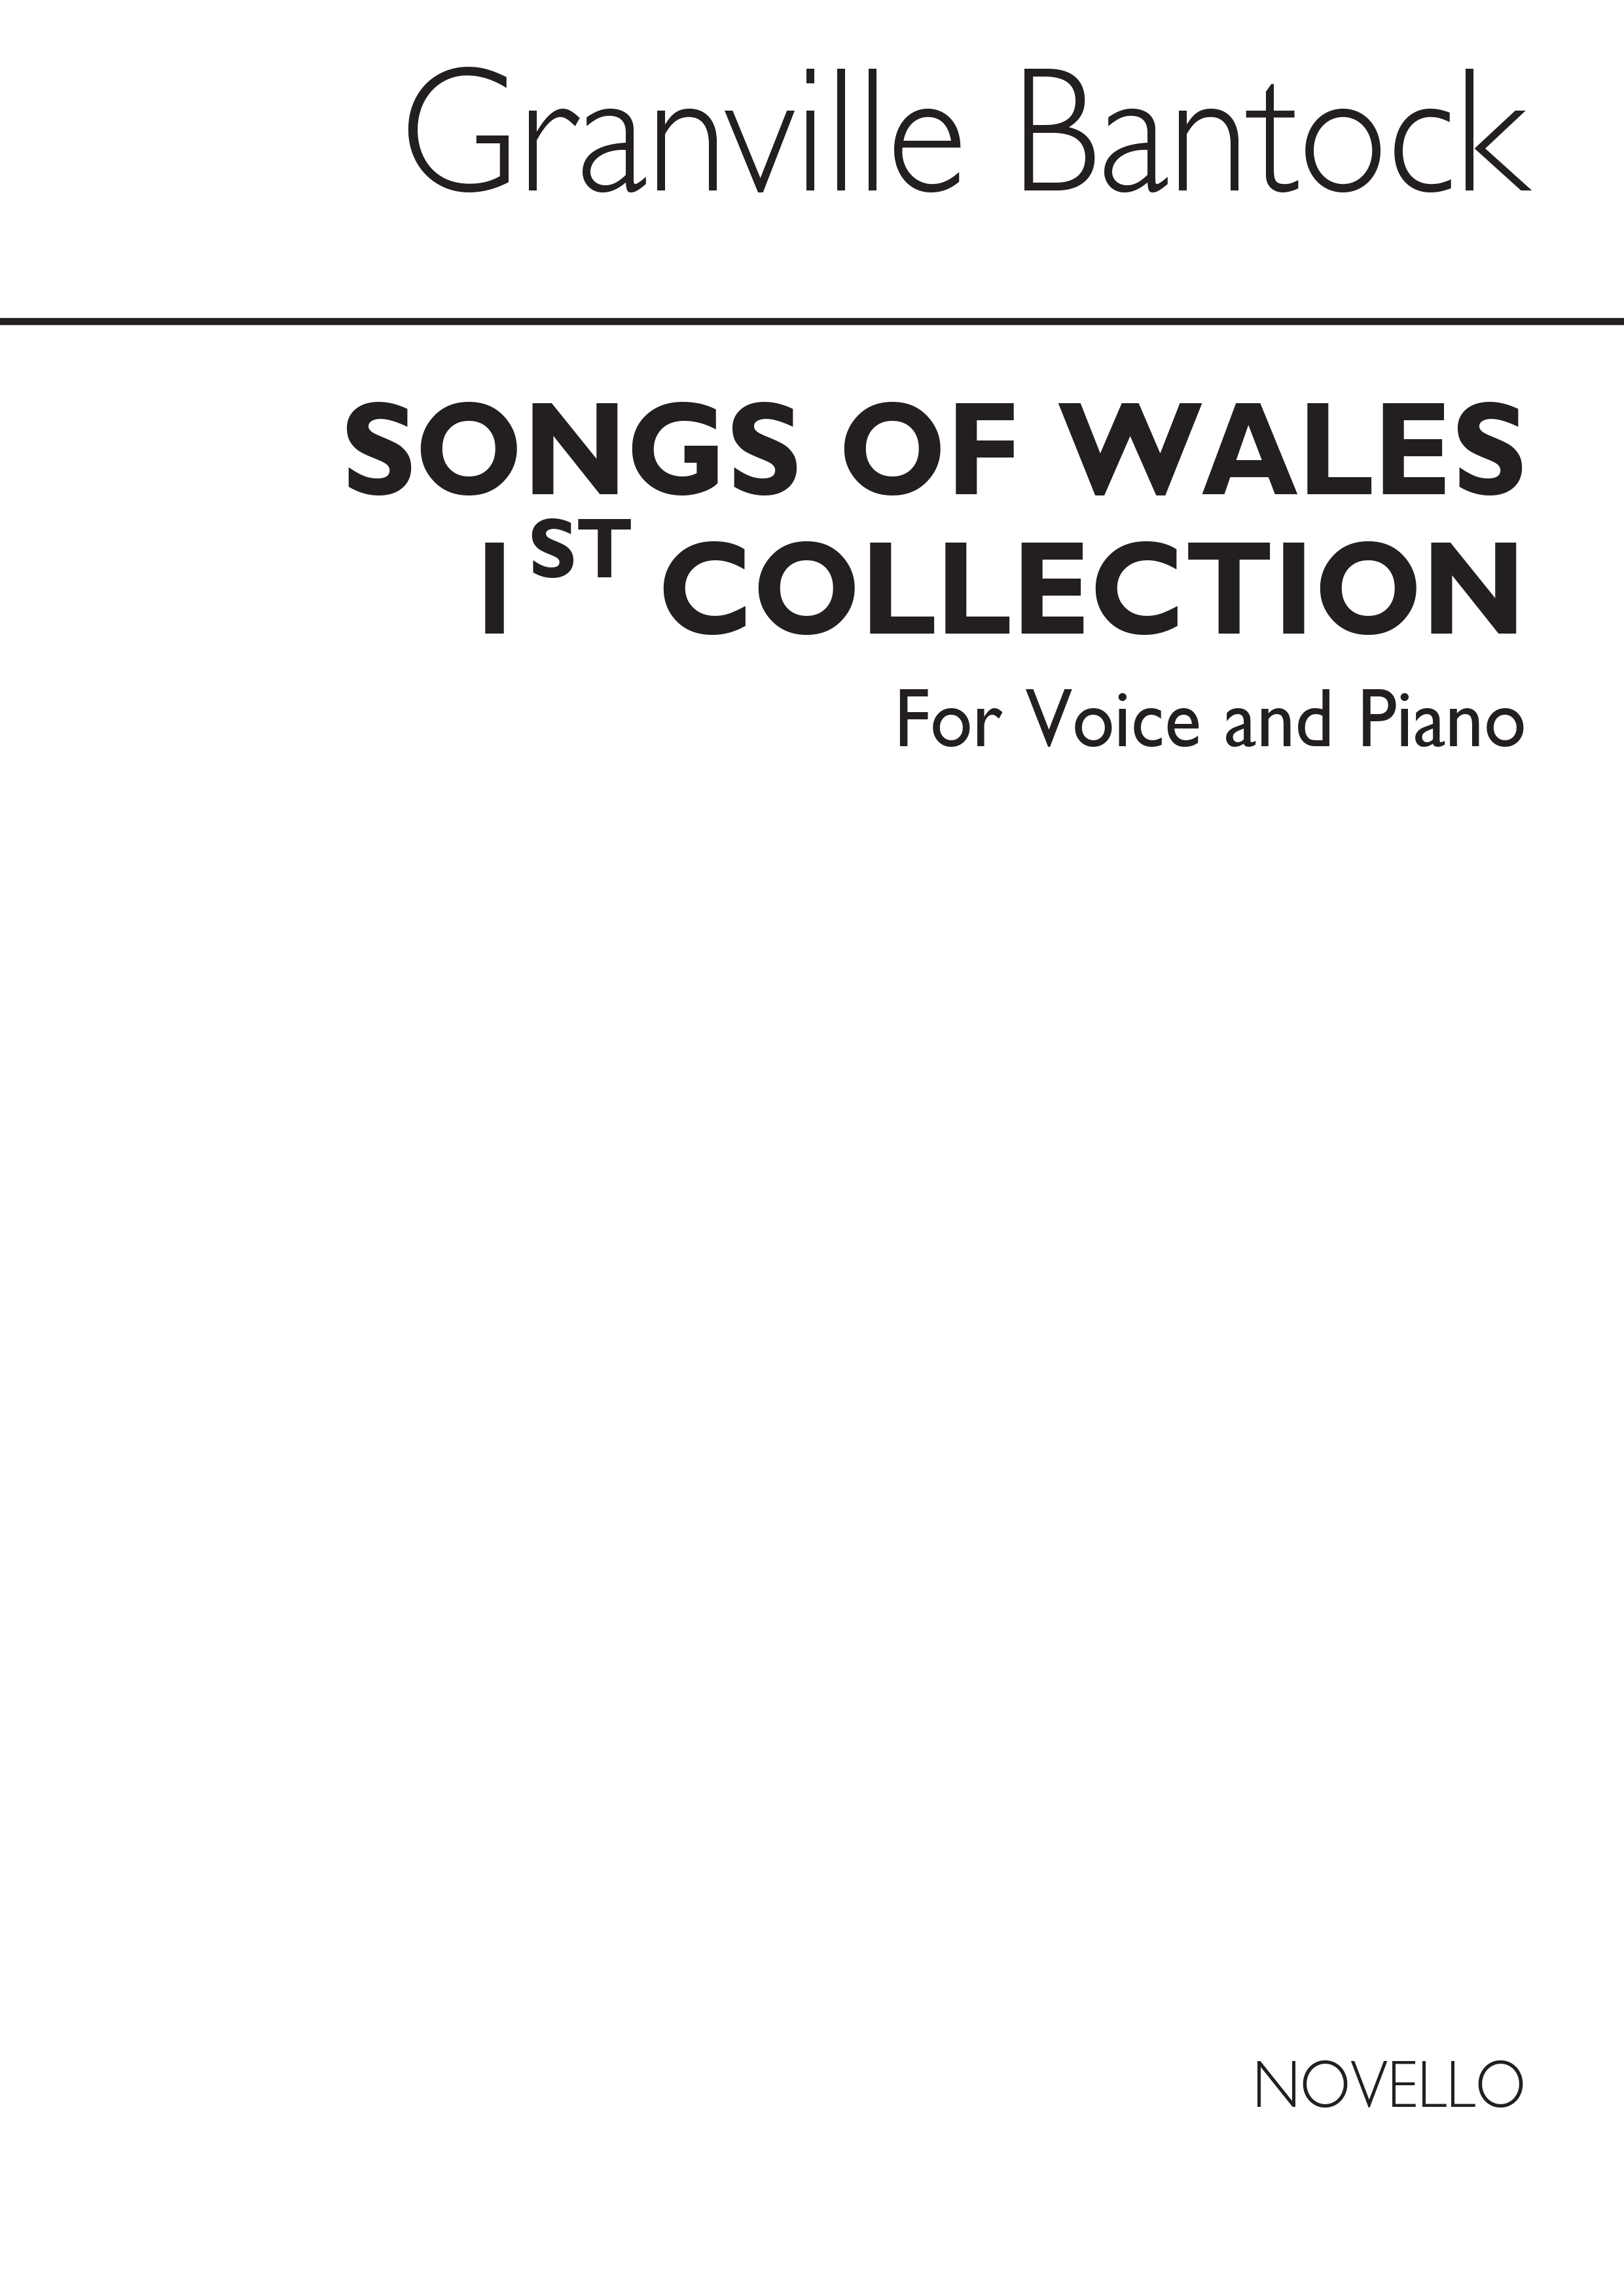 Granville Bantock: Songs Of Wales Book 1 for Voice and Piano: Voice: